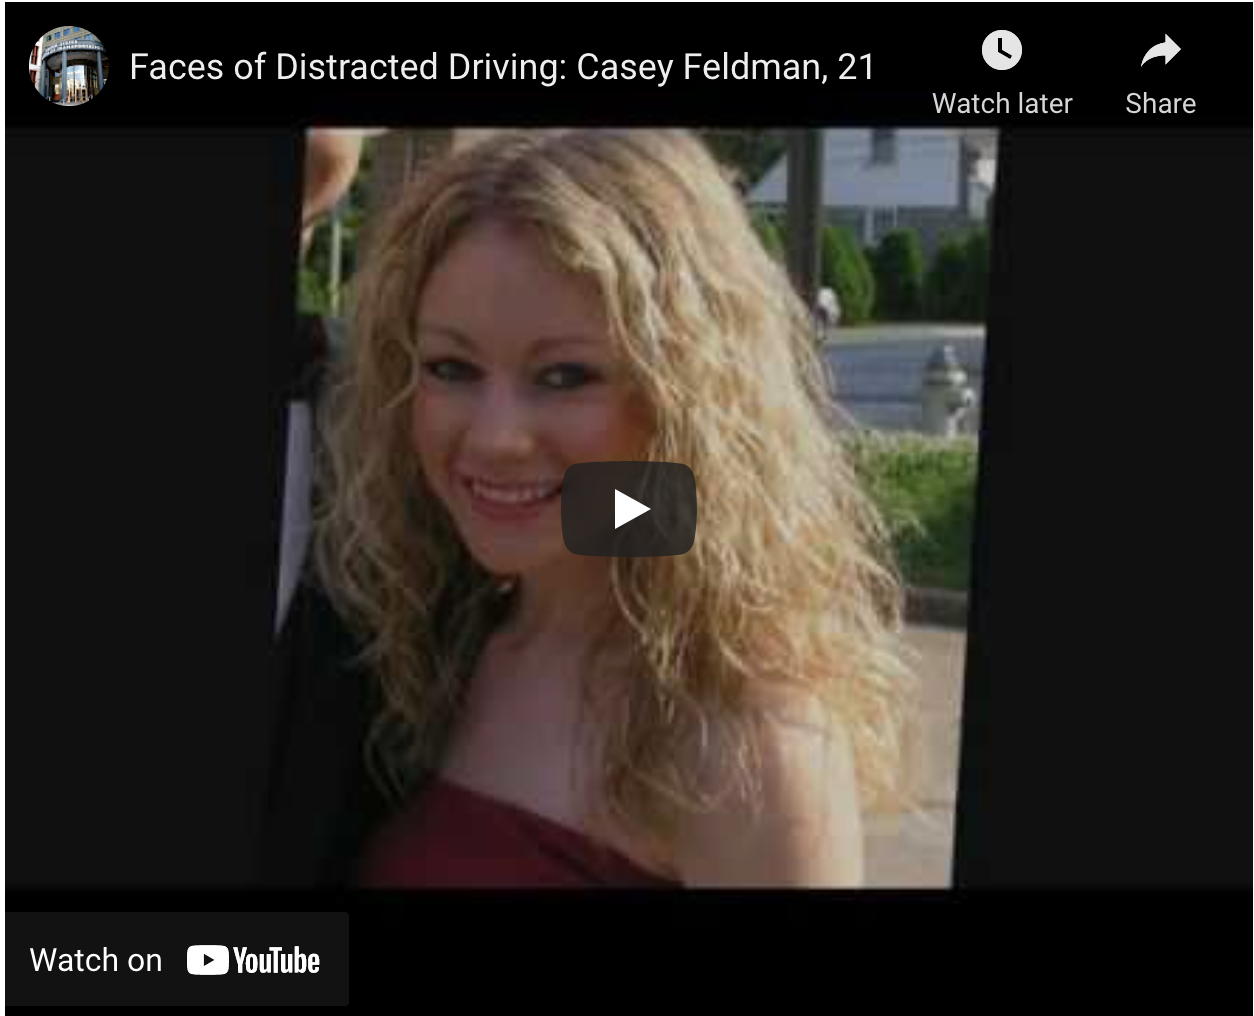 Casey Feldman is Remembered as a “Face of Distracted Driving”